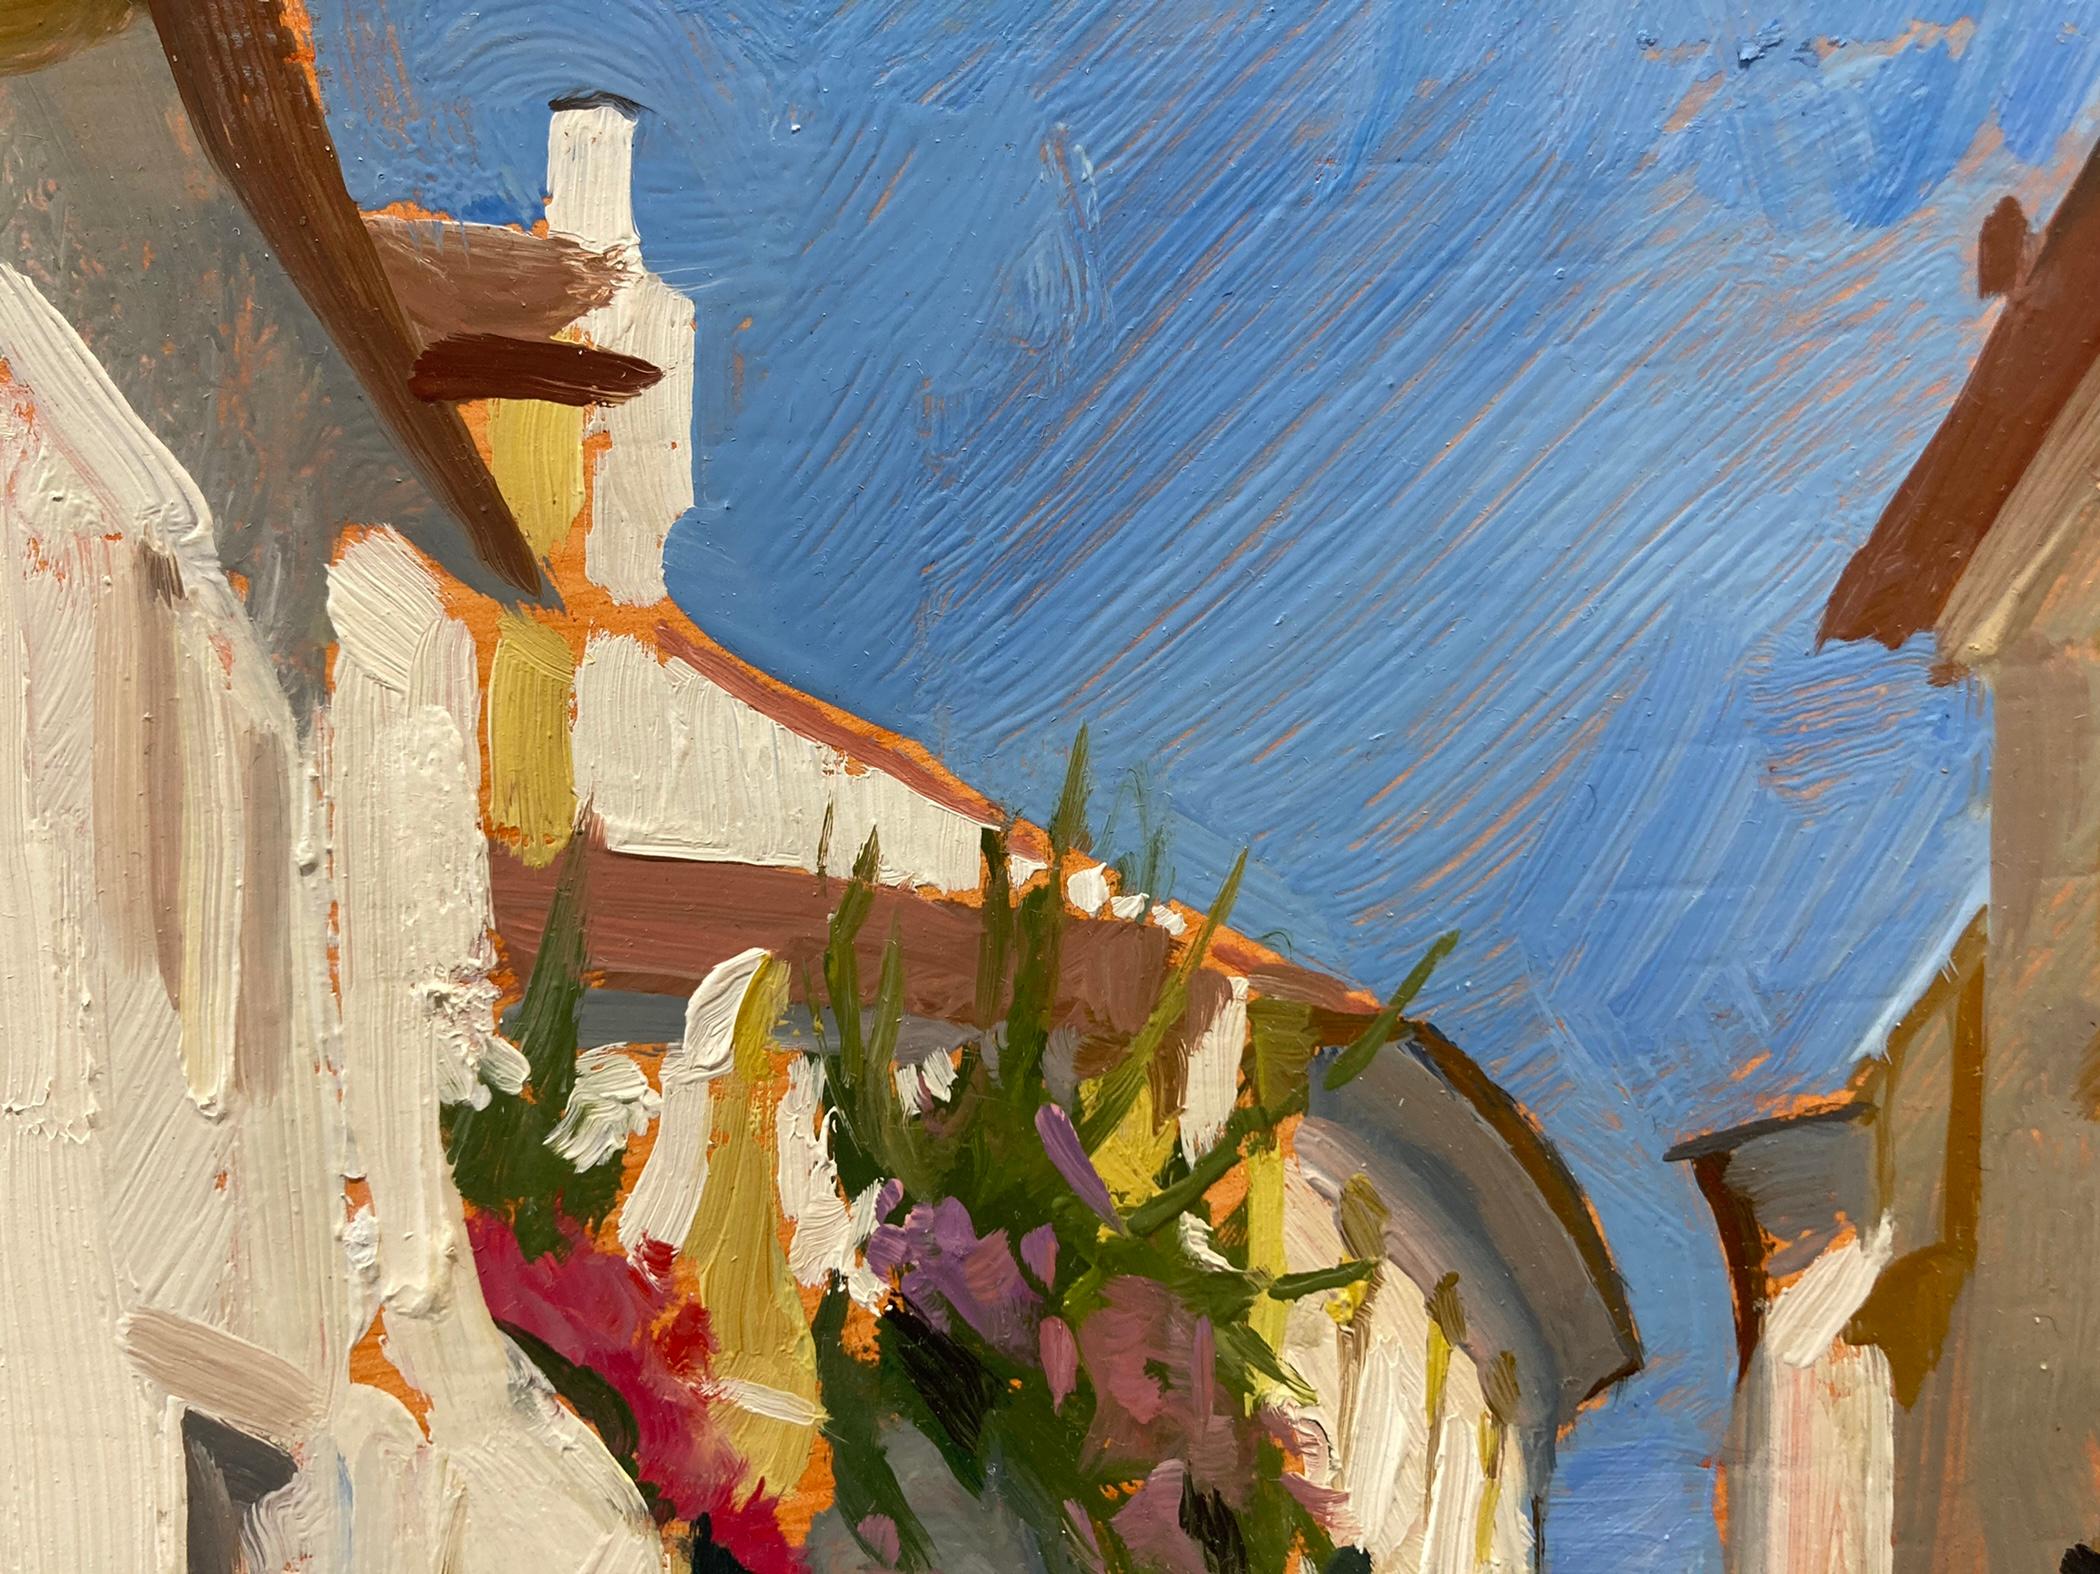 A plein air painting of a quiet street in a Portuguese city. Bougainvillea spills over the rooftop of one of the buildings, adding color and vibrancy to an otherwise tranquil scene. 

Framed dimensions: 13.5 x 17.5 inches

Artist Bio:
Marc Dalessio